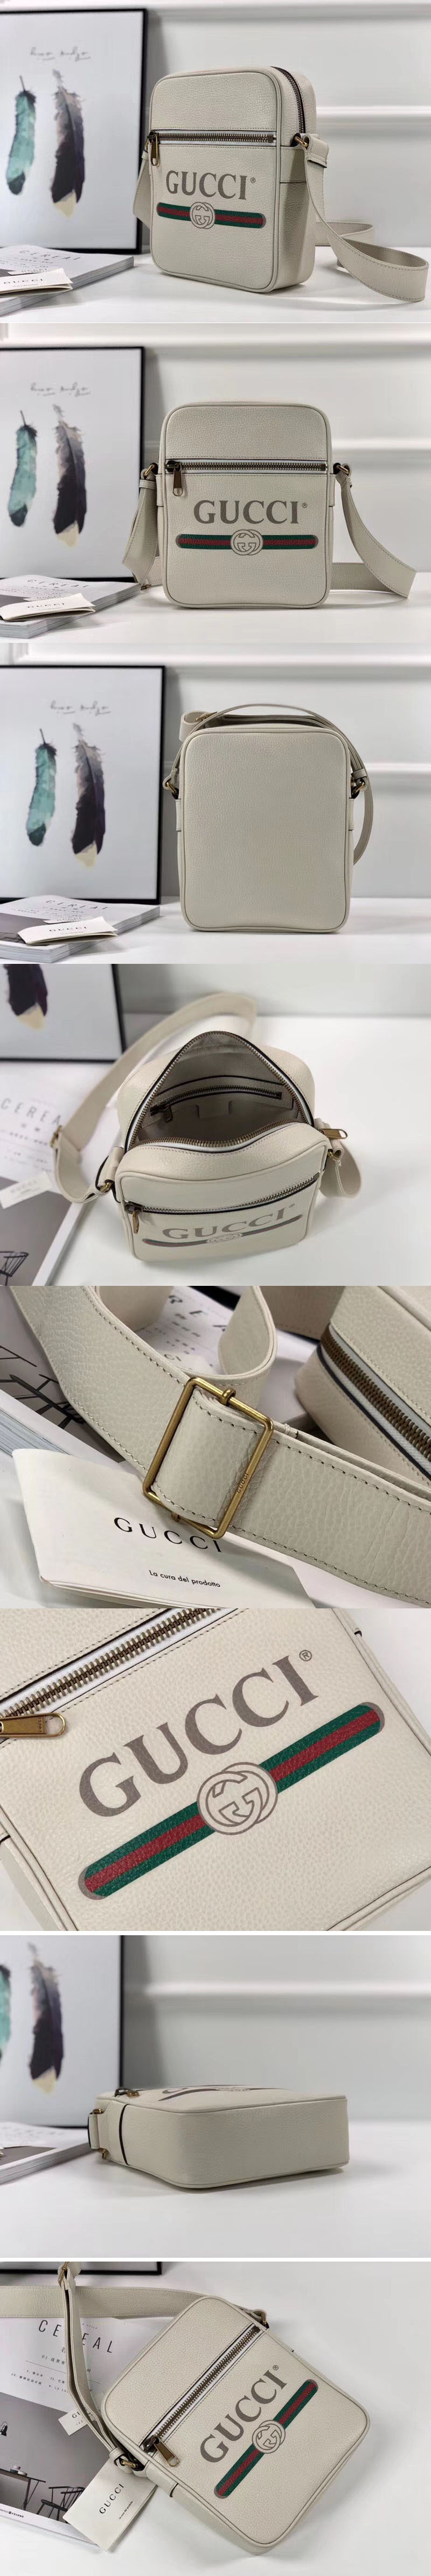 Gucci 523591 Print Messenger Bags White [523591-a1] - $189.00 : Replica breitling watches ...